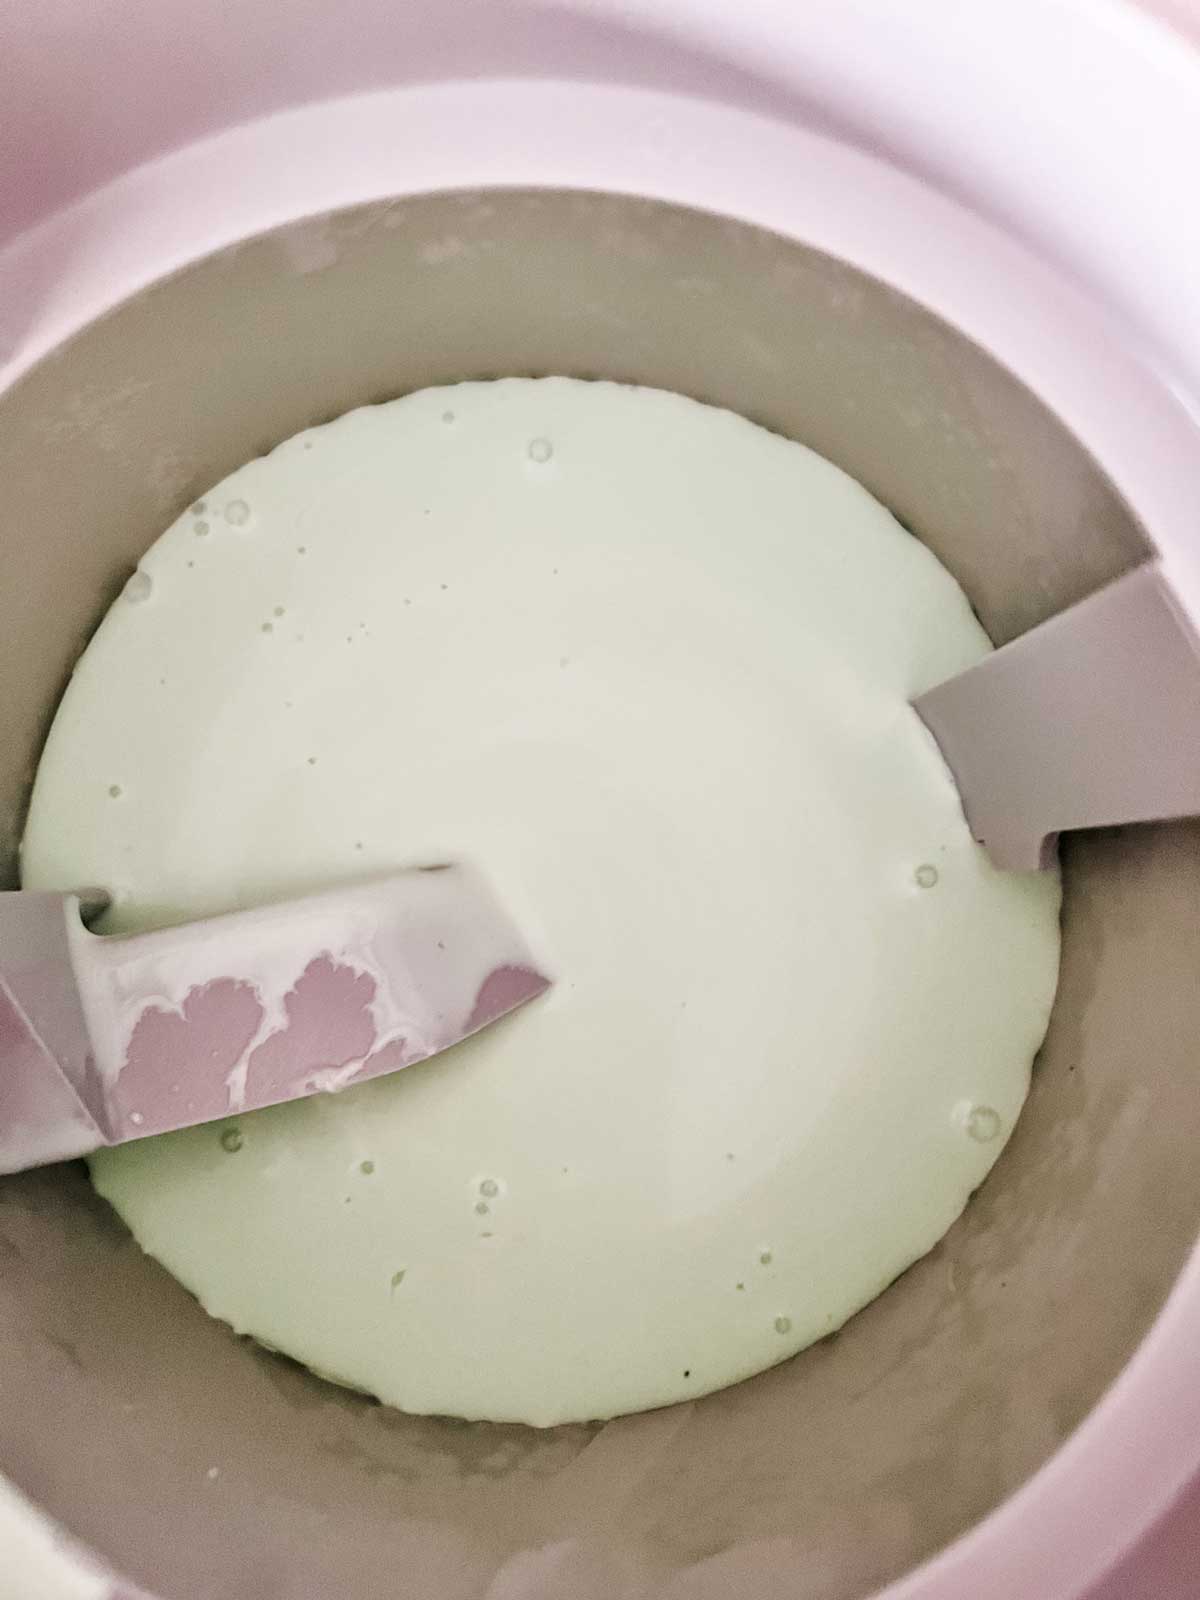 Keto mint chocolate chip ice cream in an ice cream maker ready to freeze.